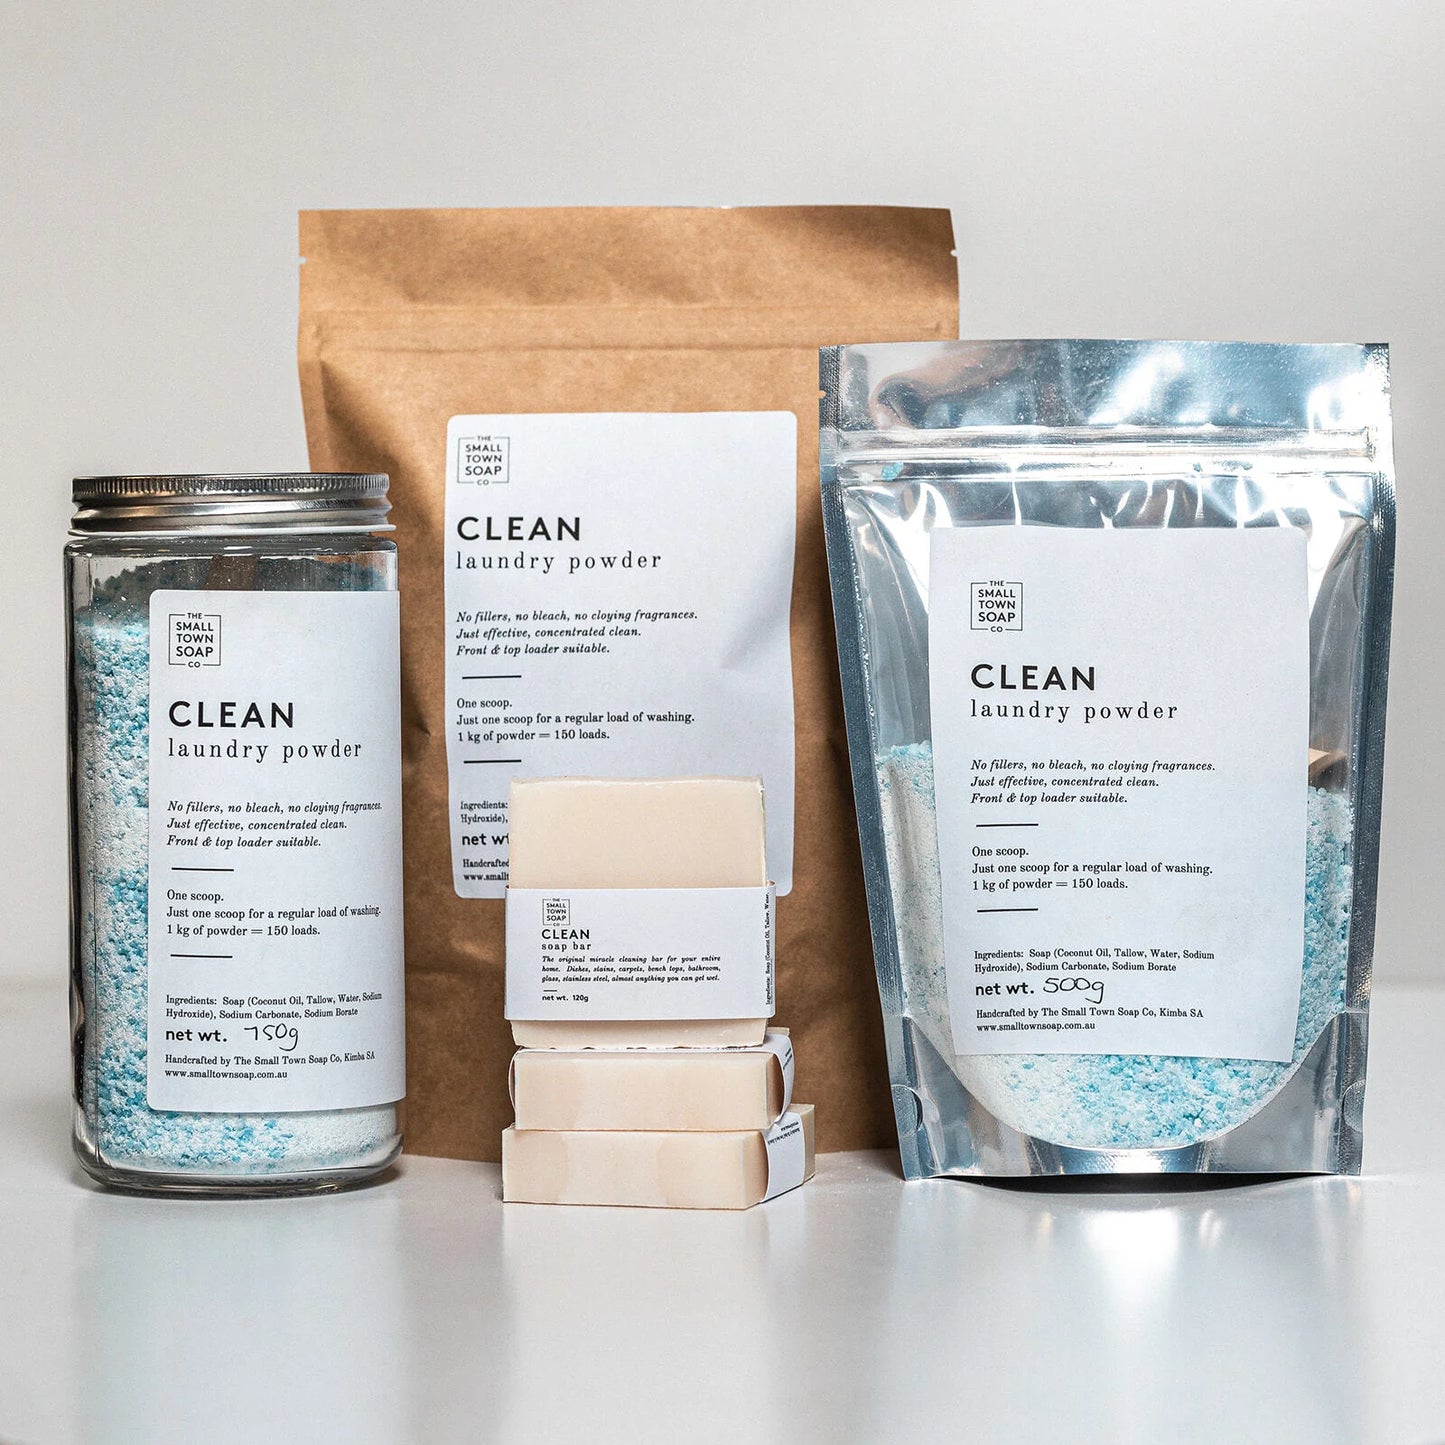 The Small Town Soap Co. Clean Laundry Powder 500g